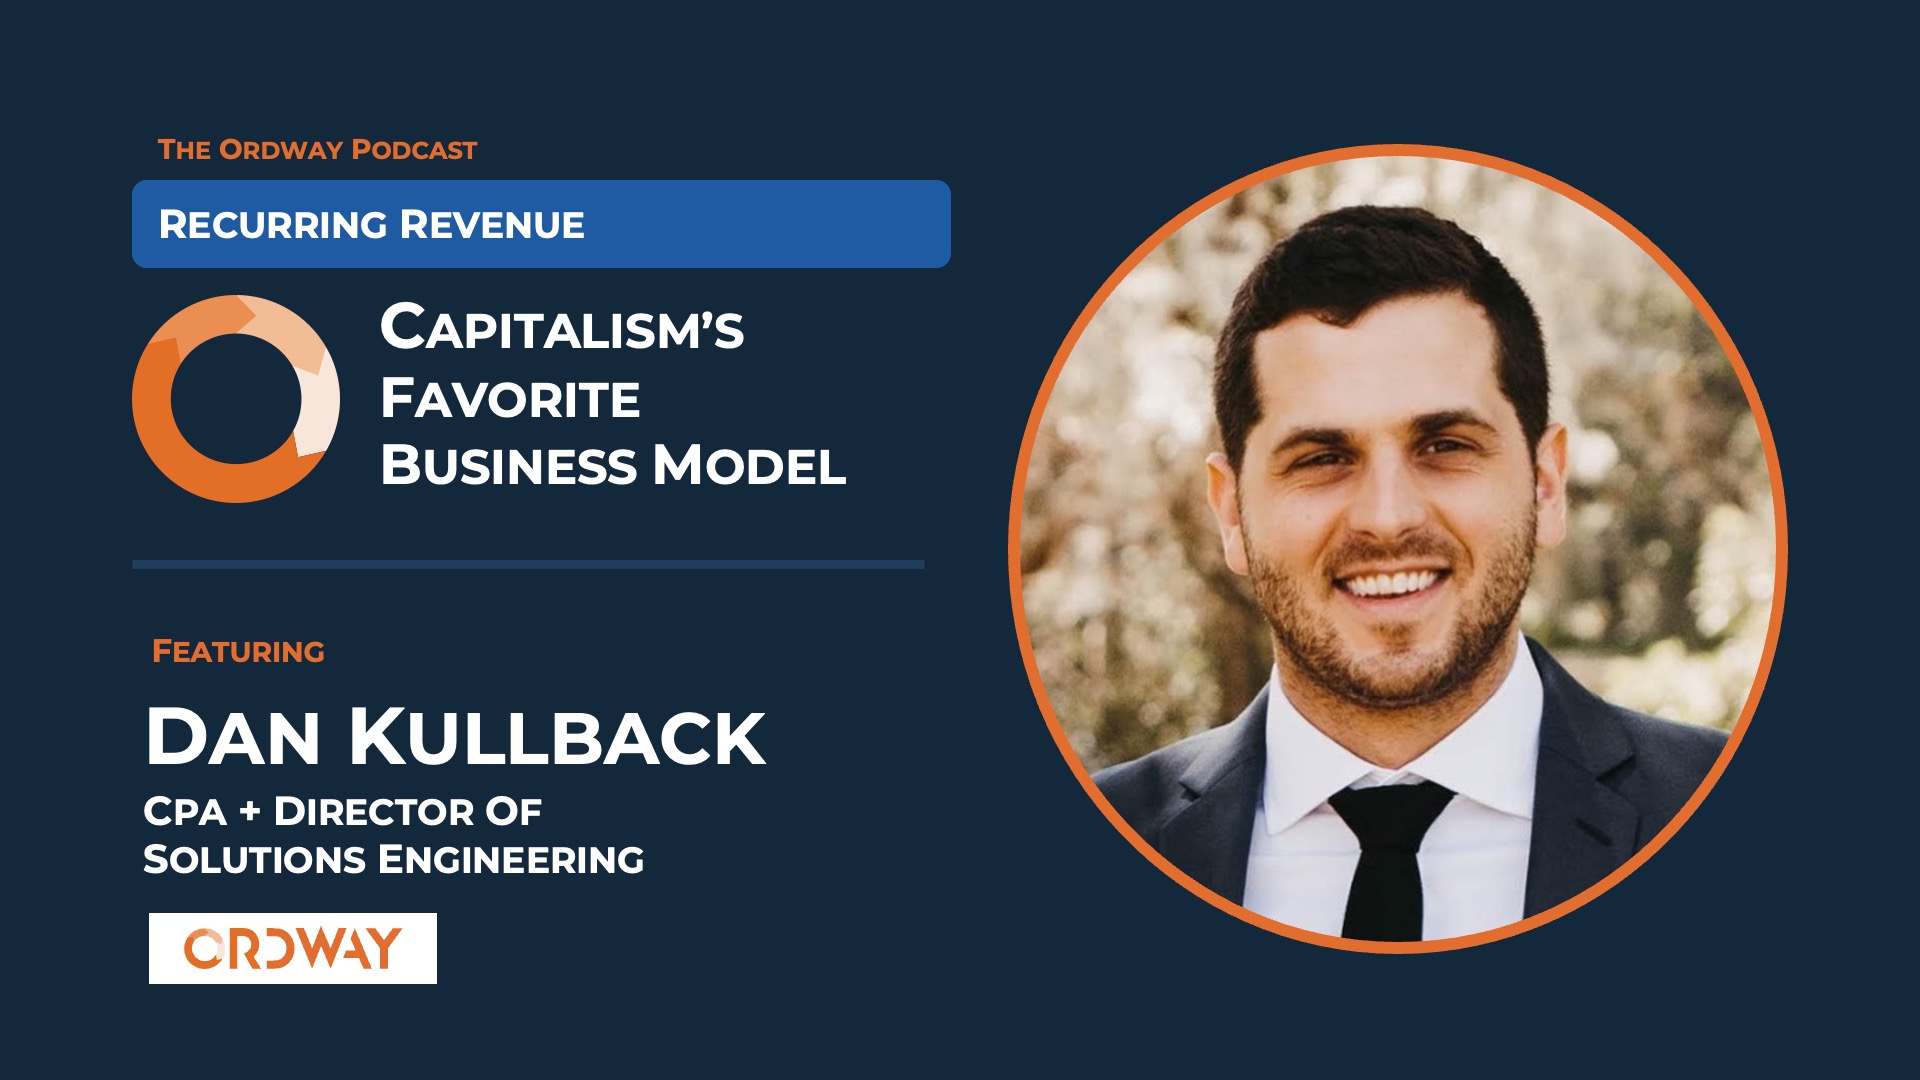 podcast advertisement for episode 2 of capitalism's favorite business model with headshot of dan kullback on blue background